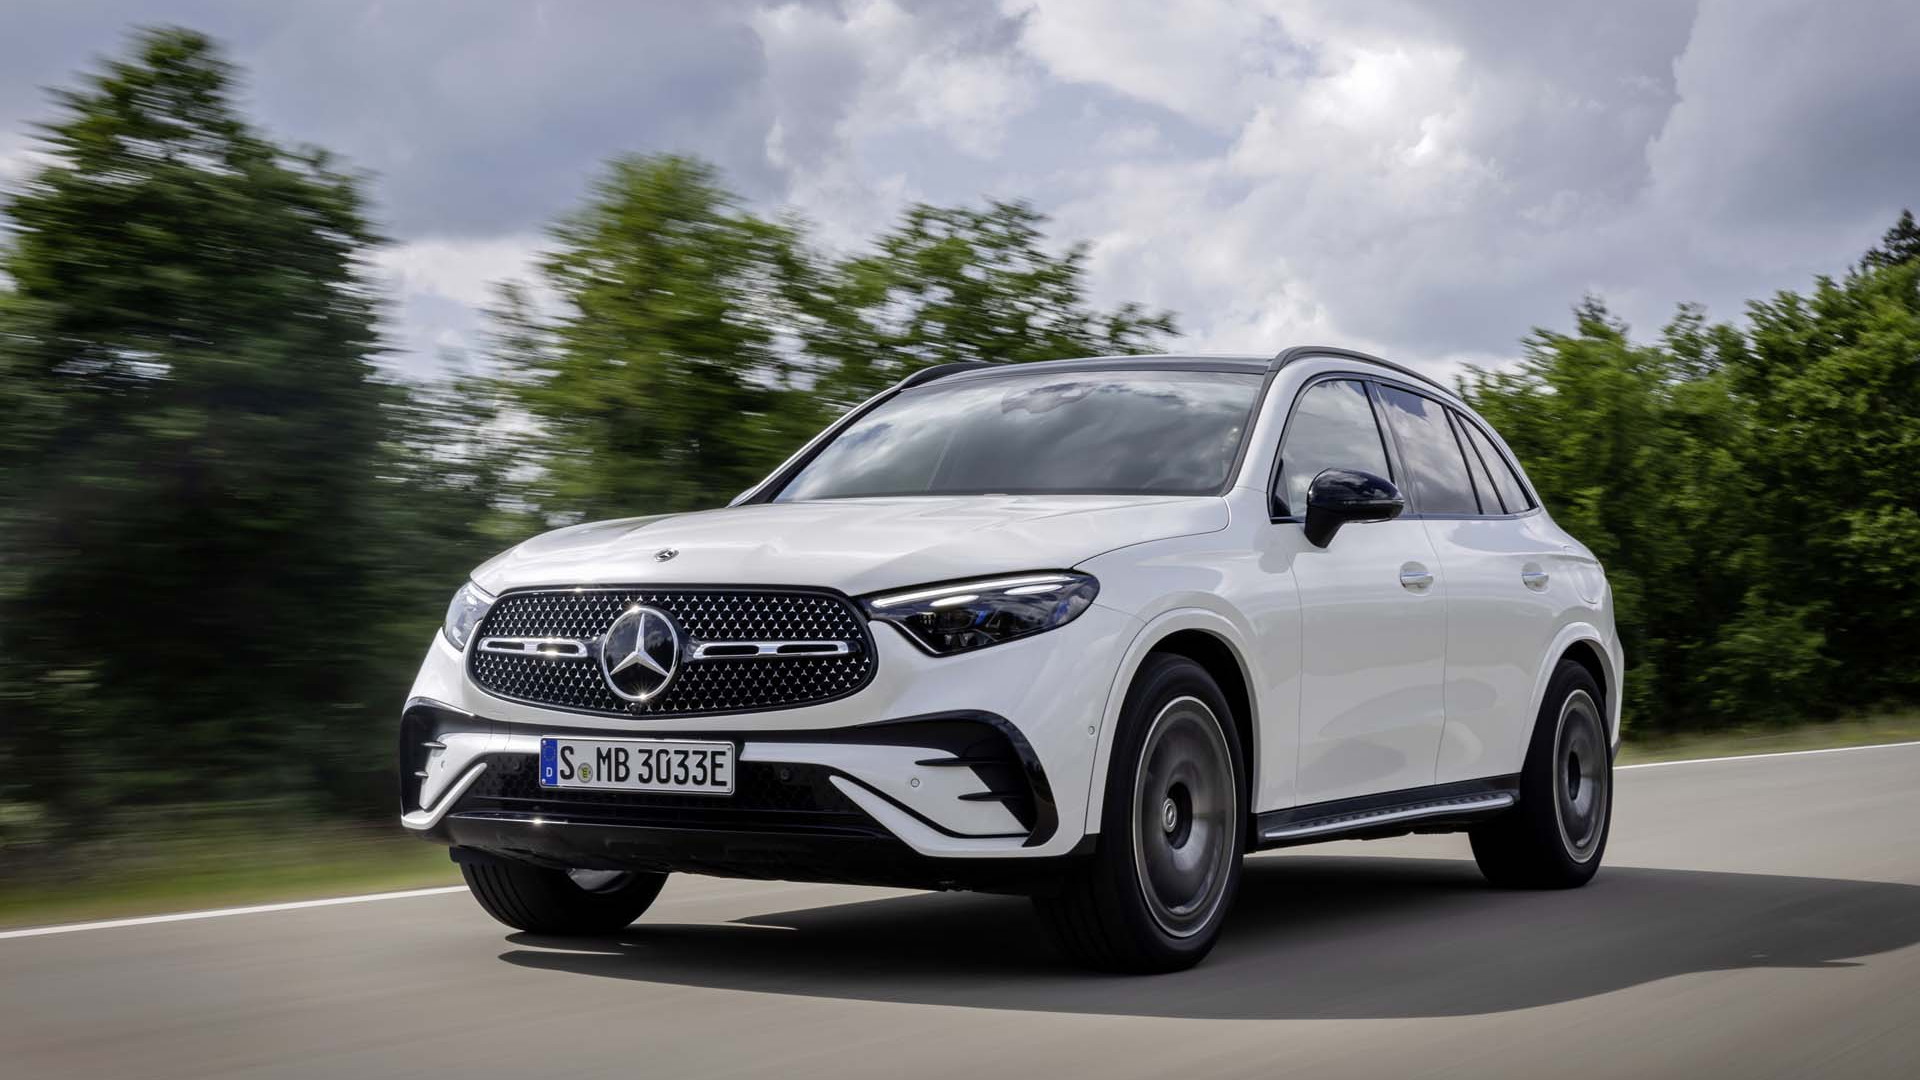 Preview: 2023 Mercedes Benz GLC Class Revealed With Mild Hybrid, Transparent Hood Tech